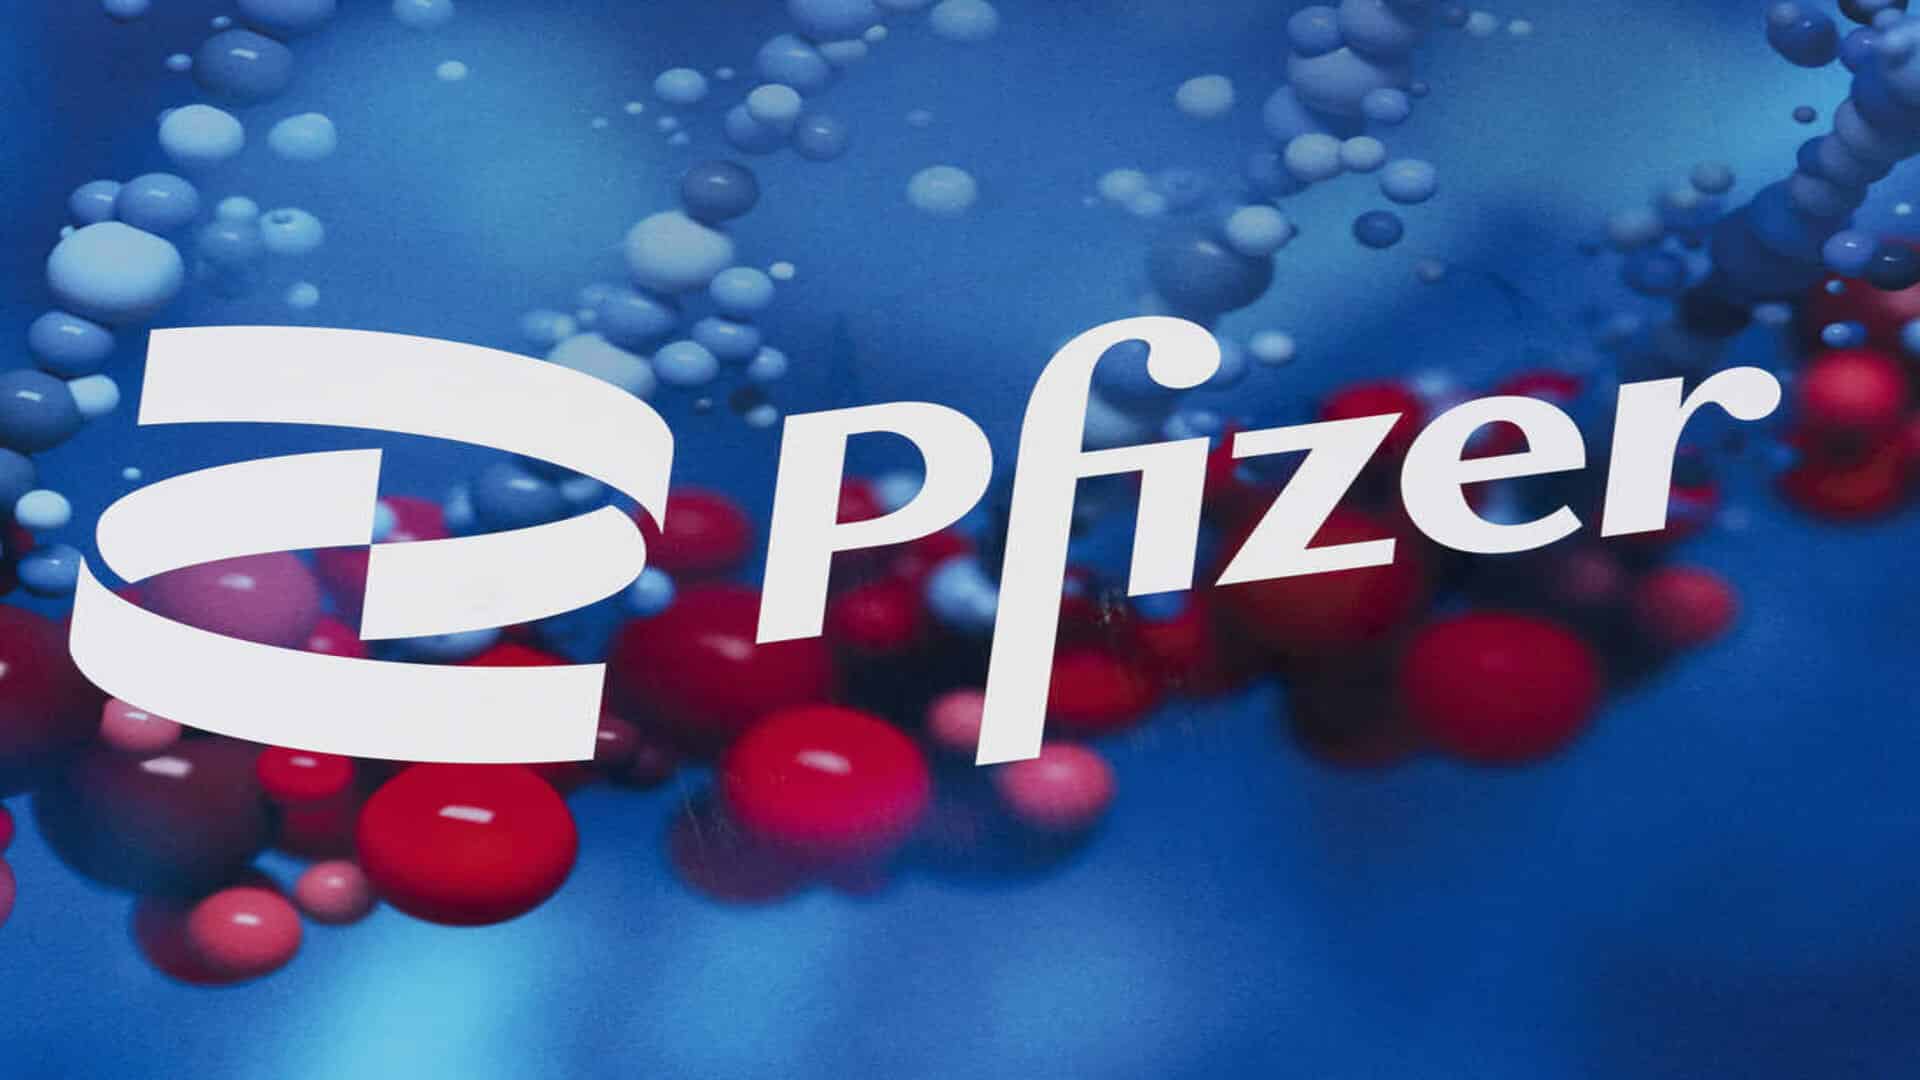 Pfizer claims its COVID-19 pill can cut hospitalization and death by 89%